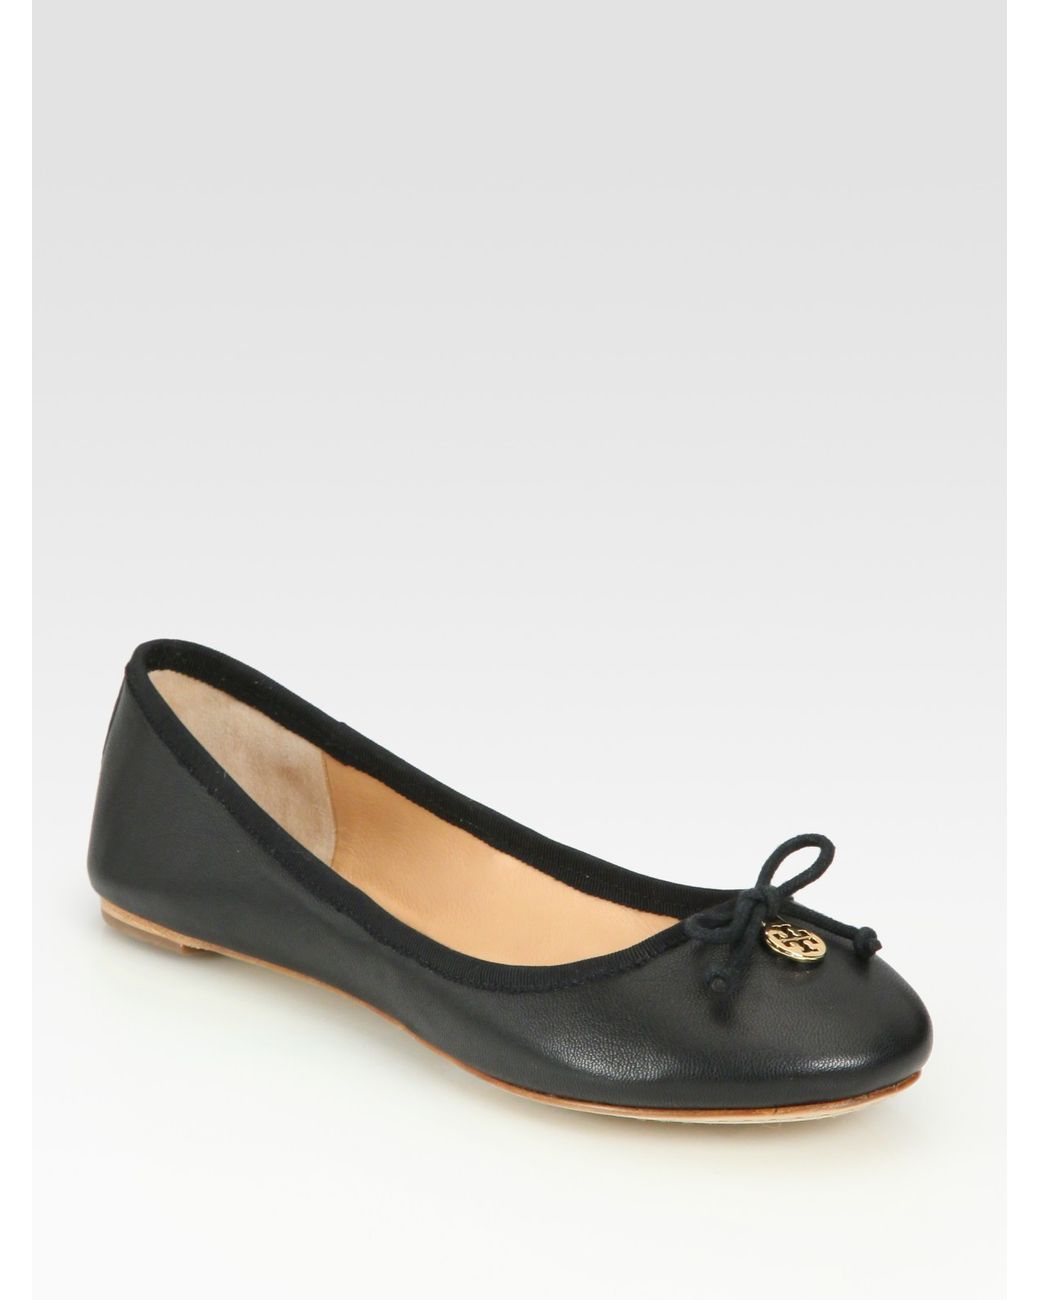 Tory Burch Chelsea Leather Bow Logo Ballet Flats in Black | Lyst